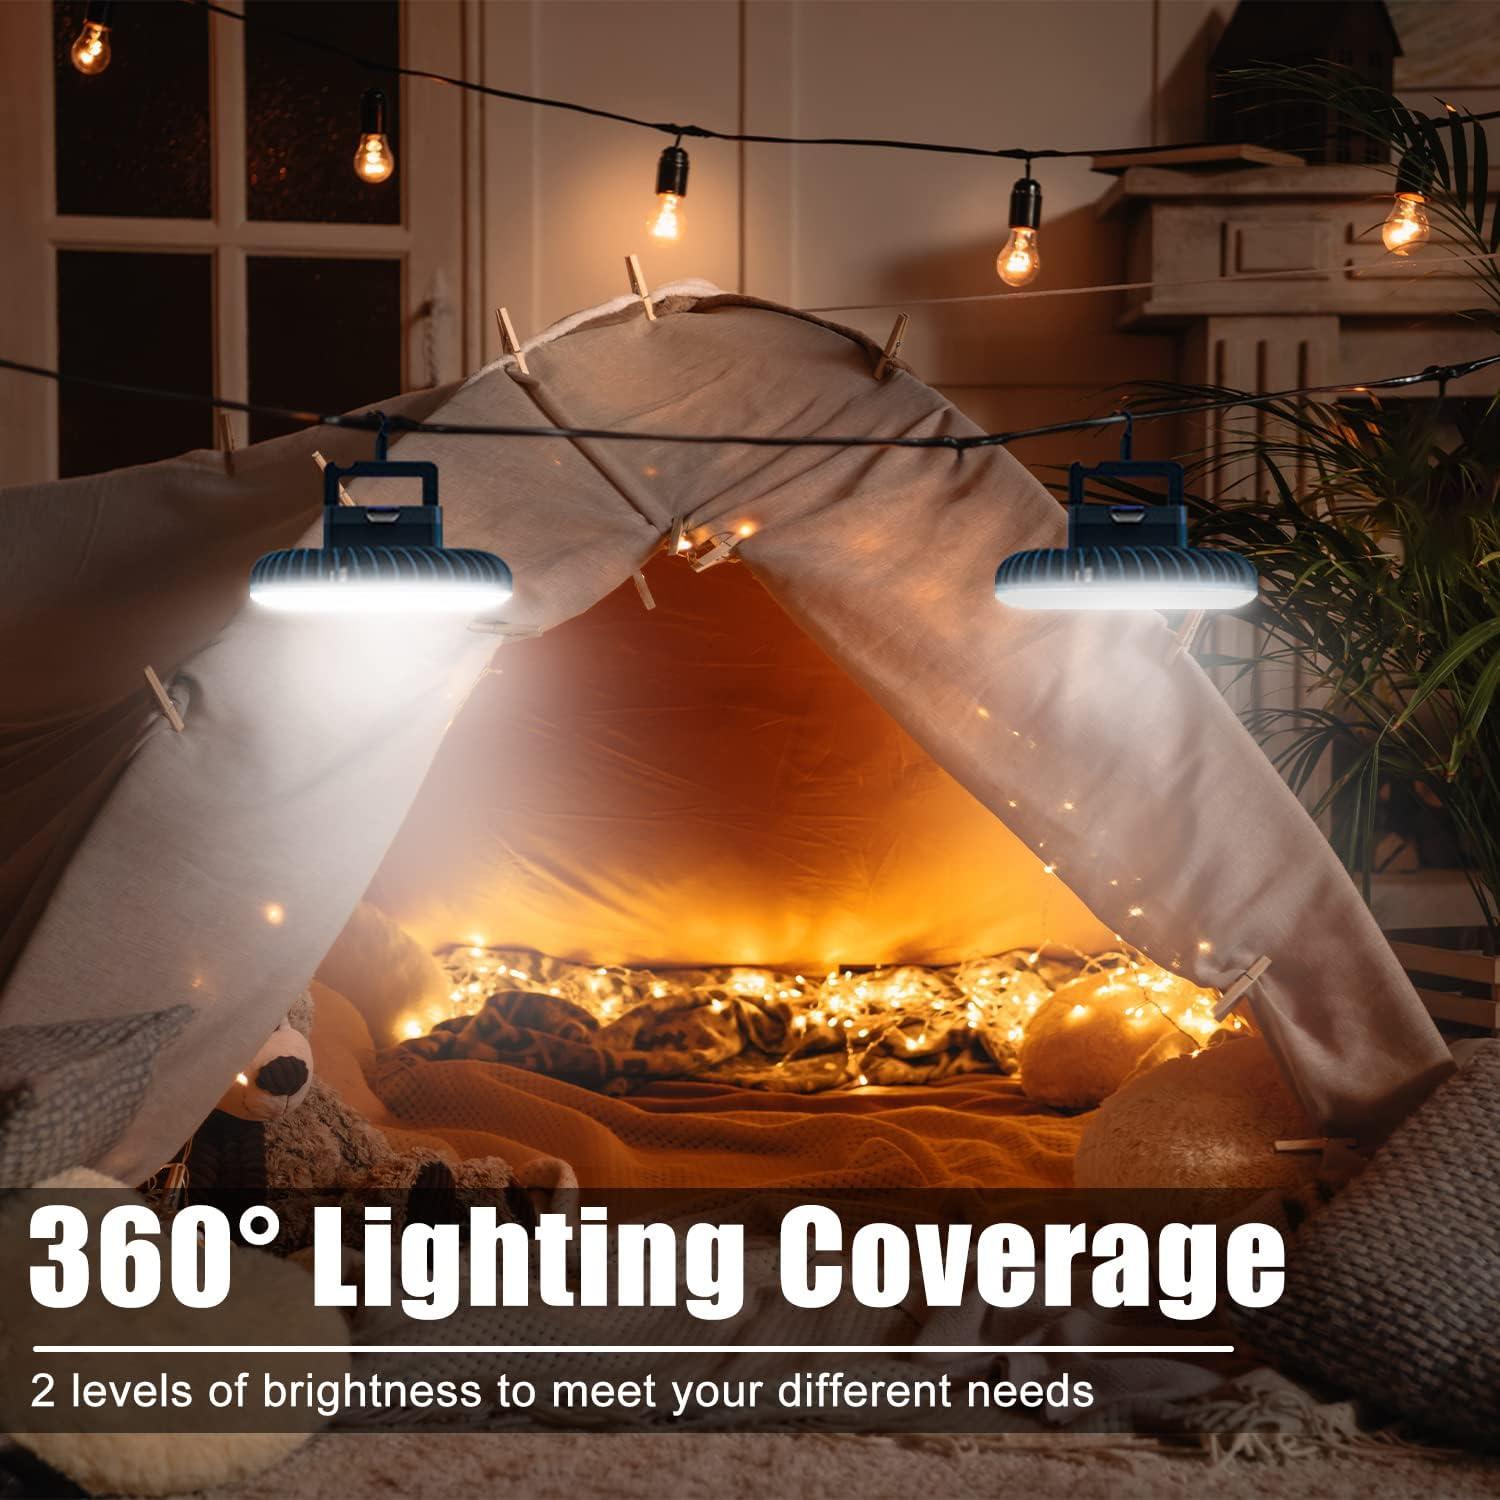 Portable Camping Fan with LED Lantern XTAUTO USB Rechargeable Waterproof  Tent Fan with Hanging Hook Magnet Survival Kits for Indoor Outdoor Hiking  Car Office Desk Outdoor Emergency Power Outage 2-pack